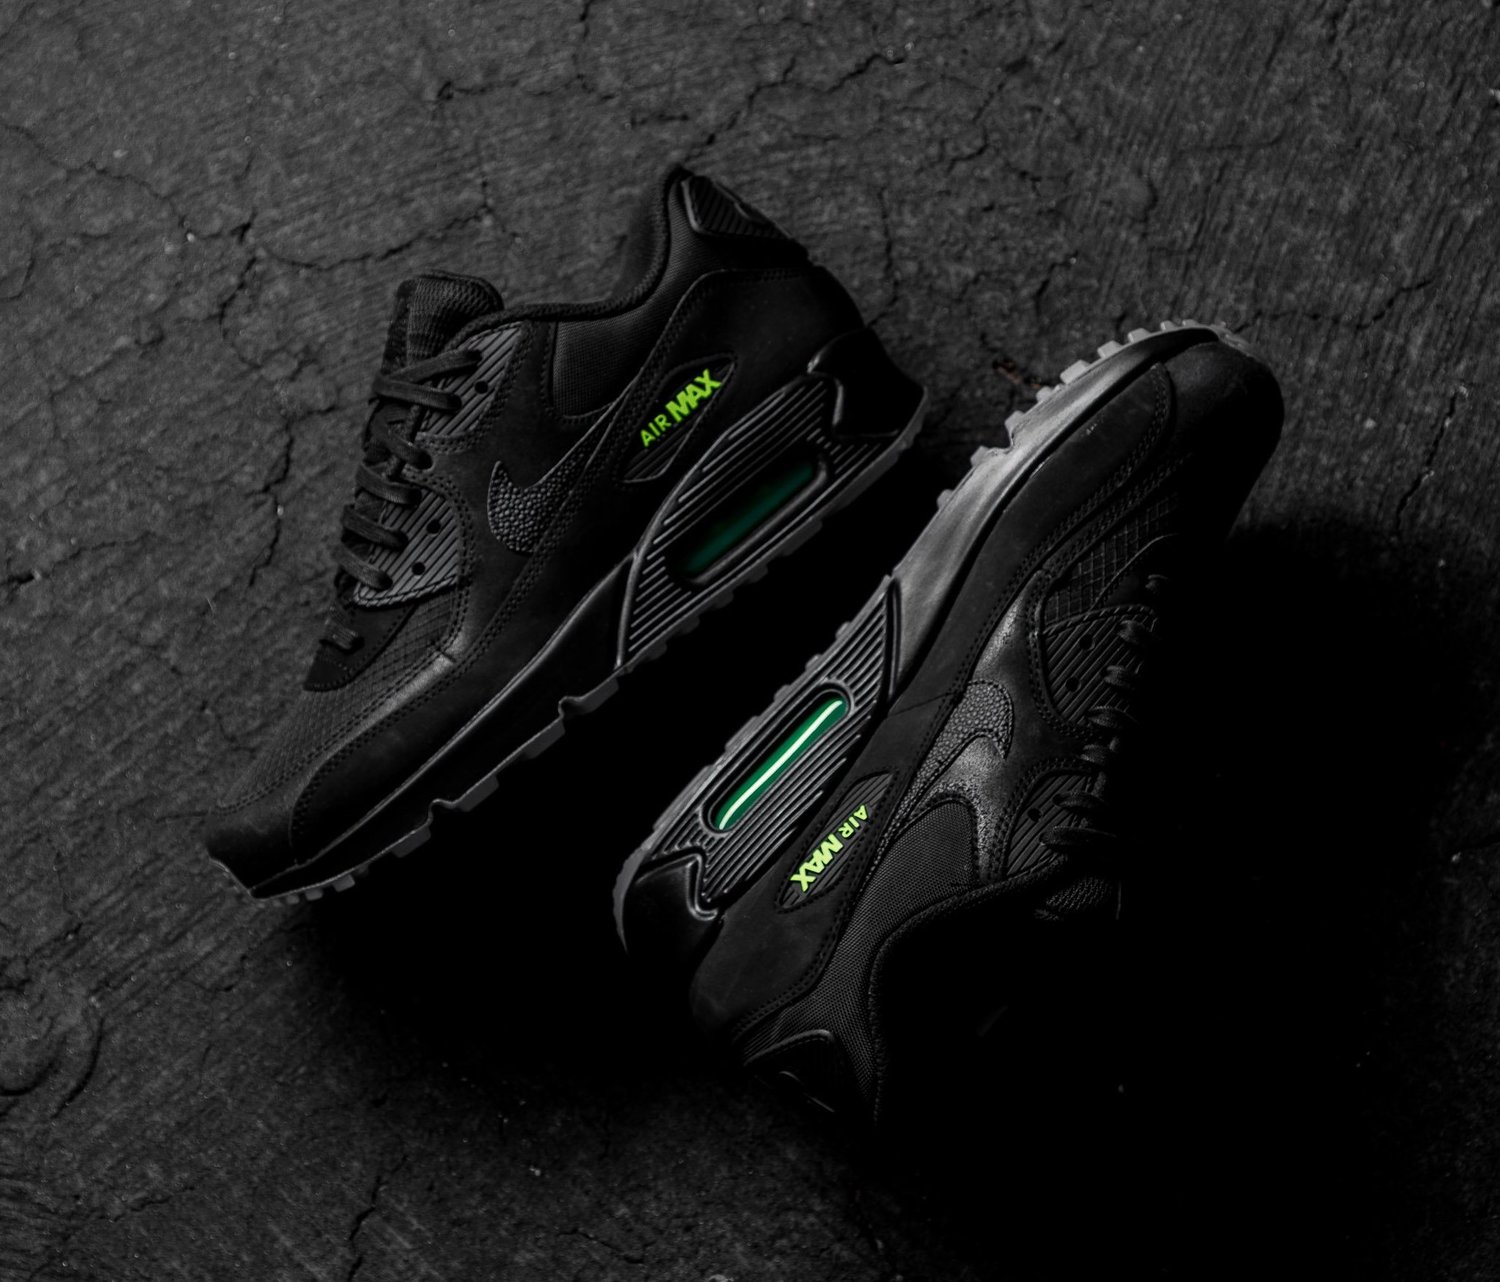 Hora suspicaz granja Now Available: Nike Air Max 90 "Night Ops" — Sneaker Shouts